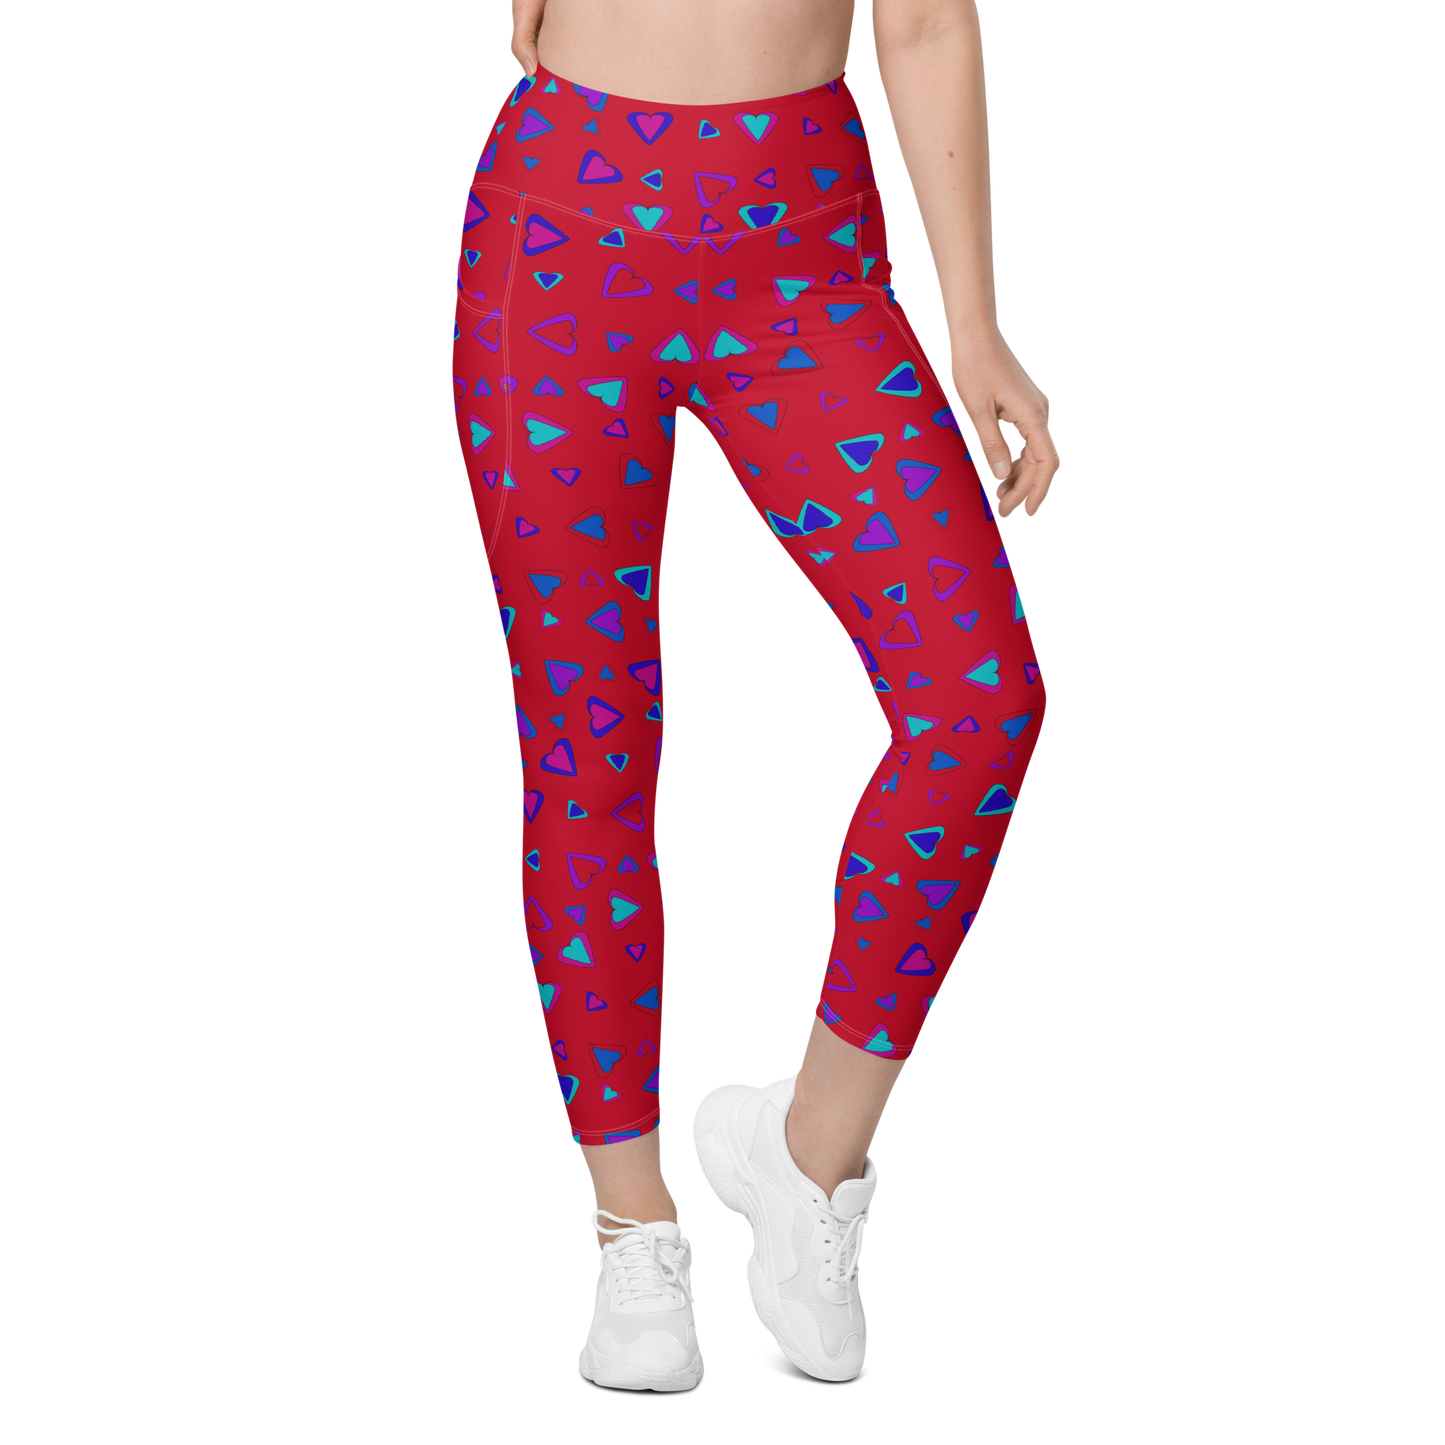 Rainbow Of Hearts | Batch 01 | Seamless Patterns | All-Over Print Leggings with Pockets - #1